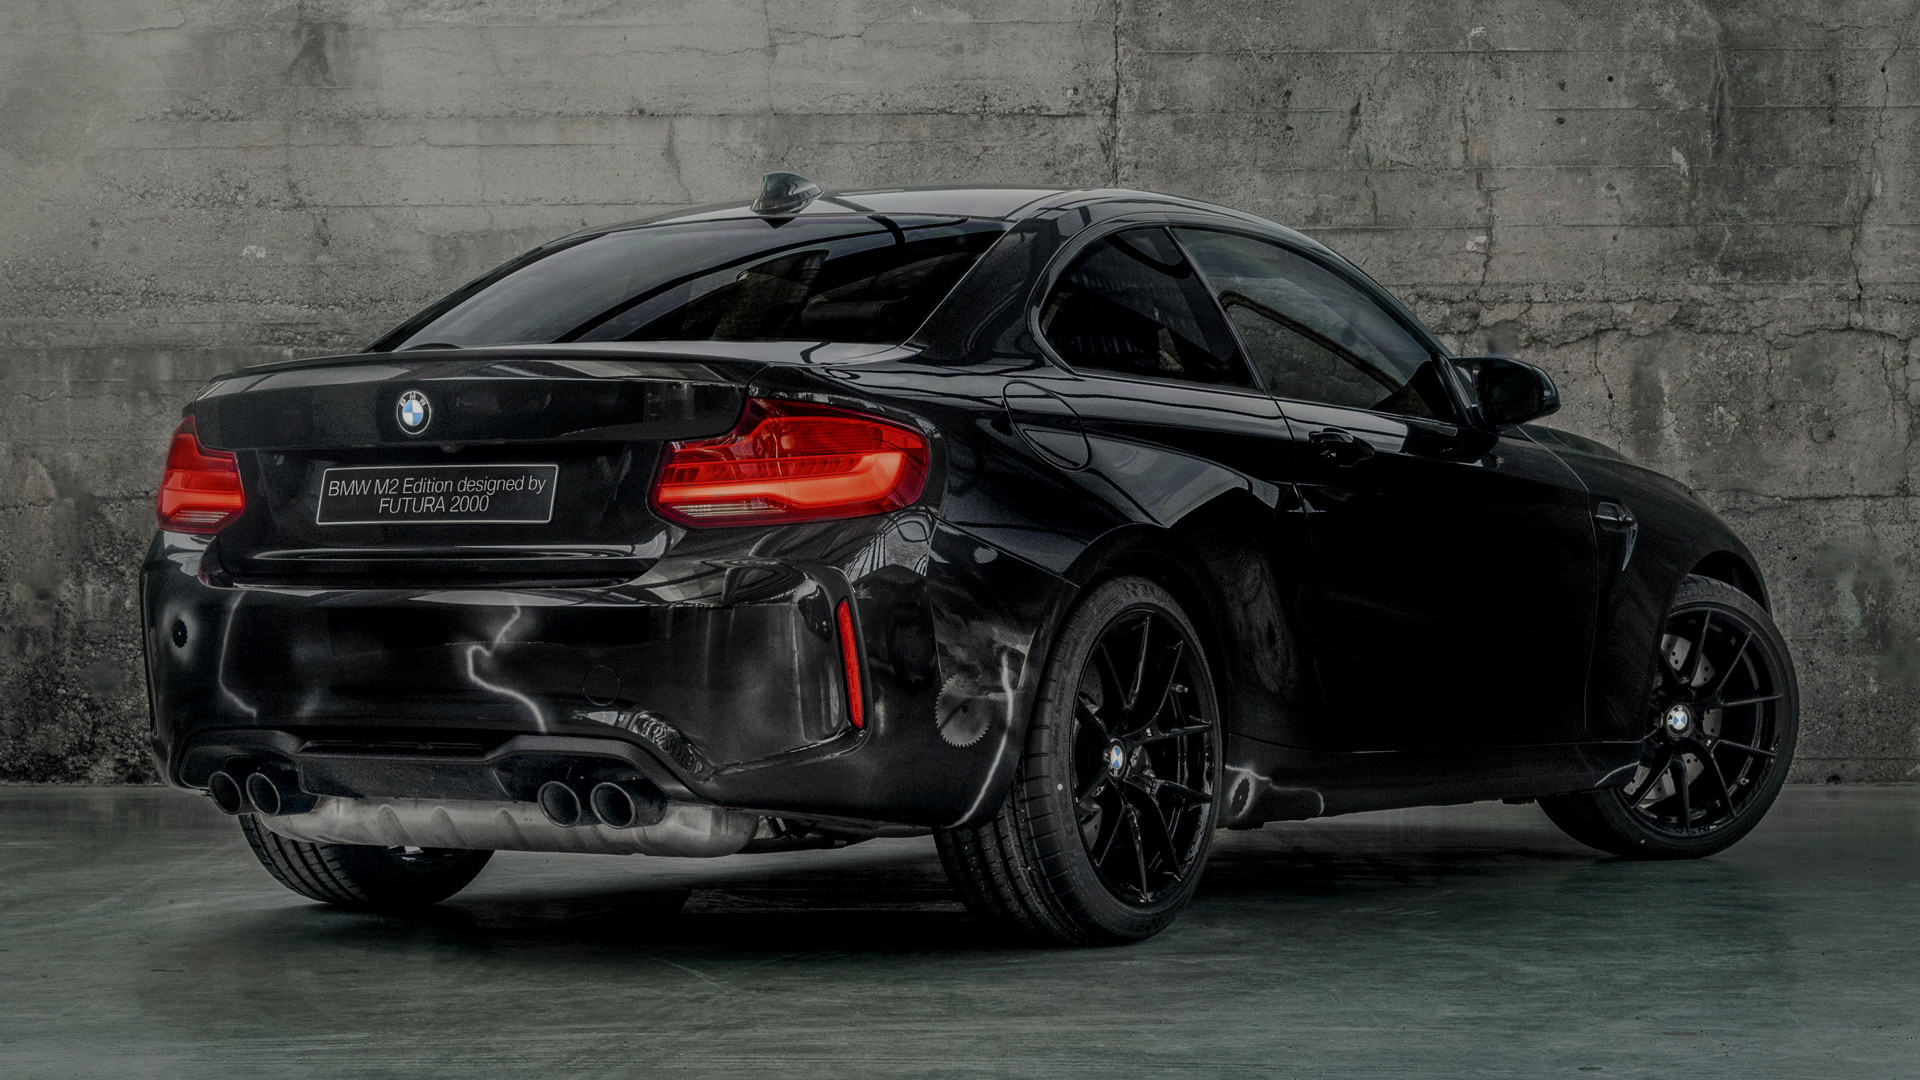 vehicles, bmw m2 coupe, bmw m2 coupe edition designed by futura 2000, bmw